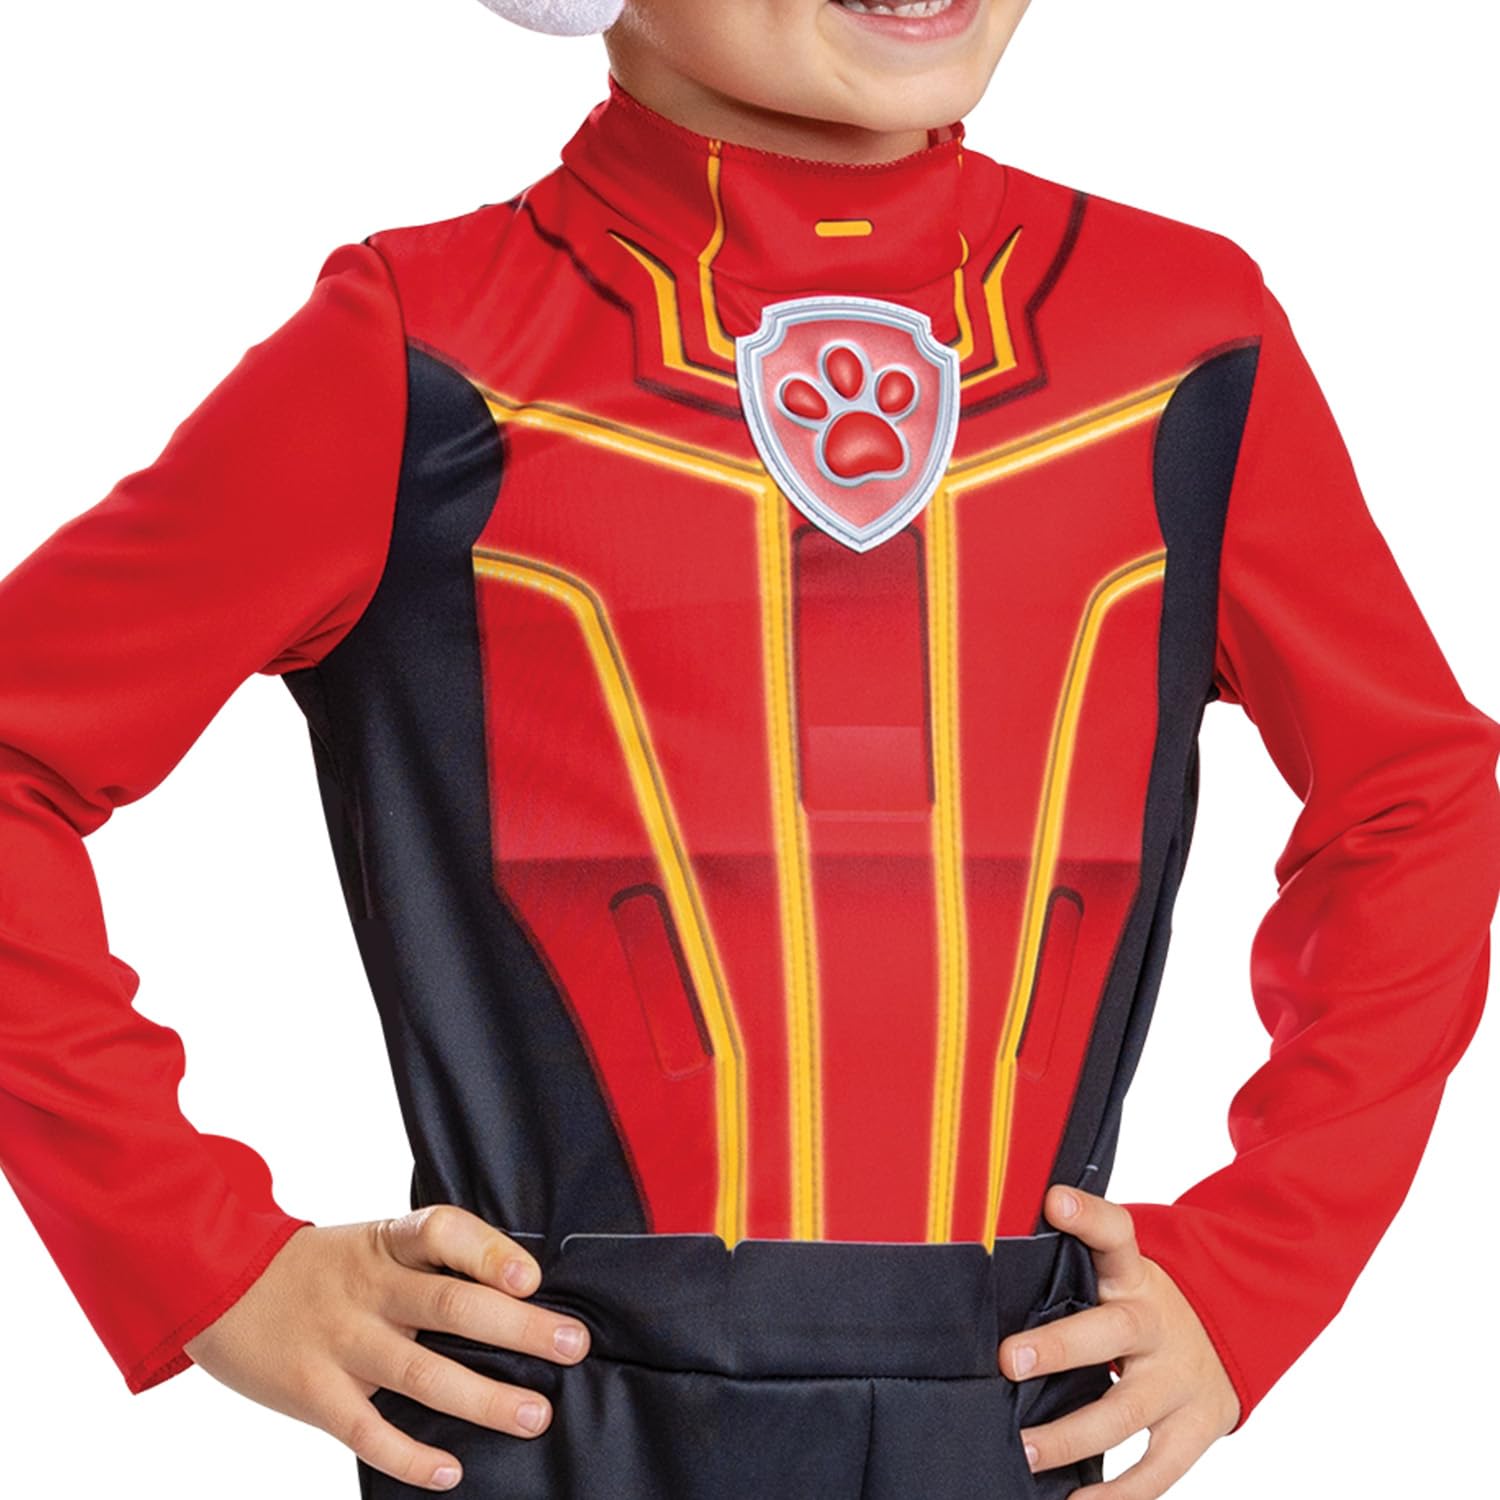 Disguise Marshall Halloween Costume, Official Toddler Paw Patrol Costume Outfit with Headpiece for Kids